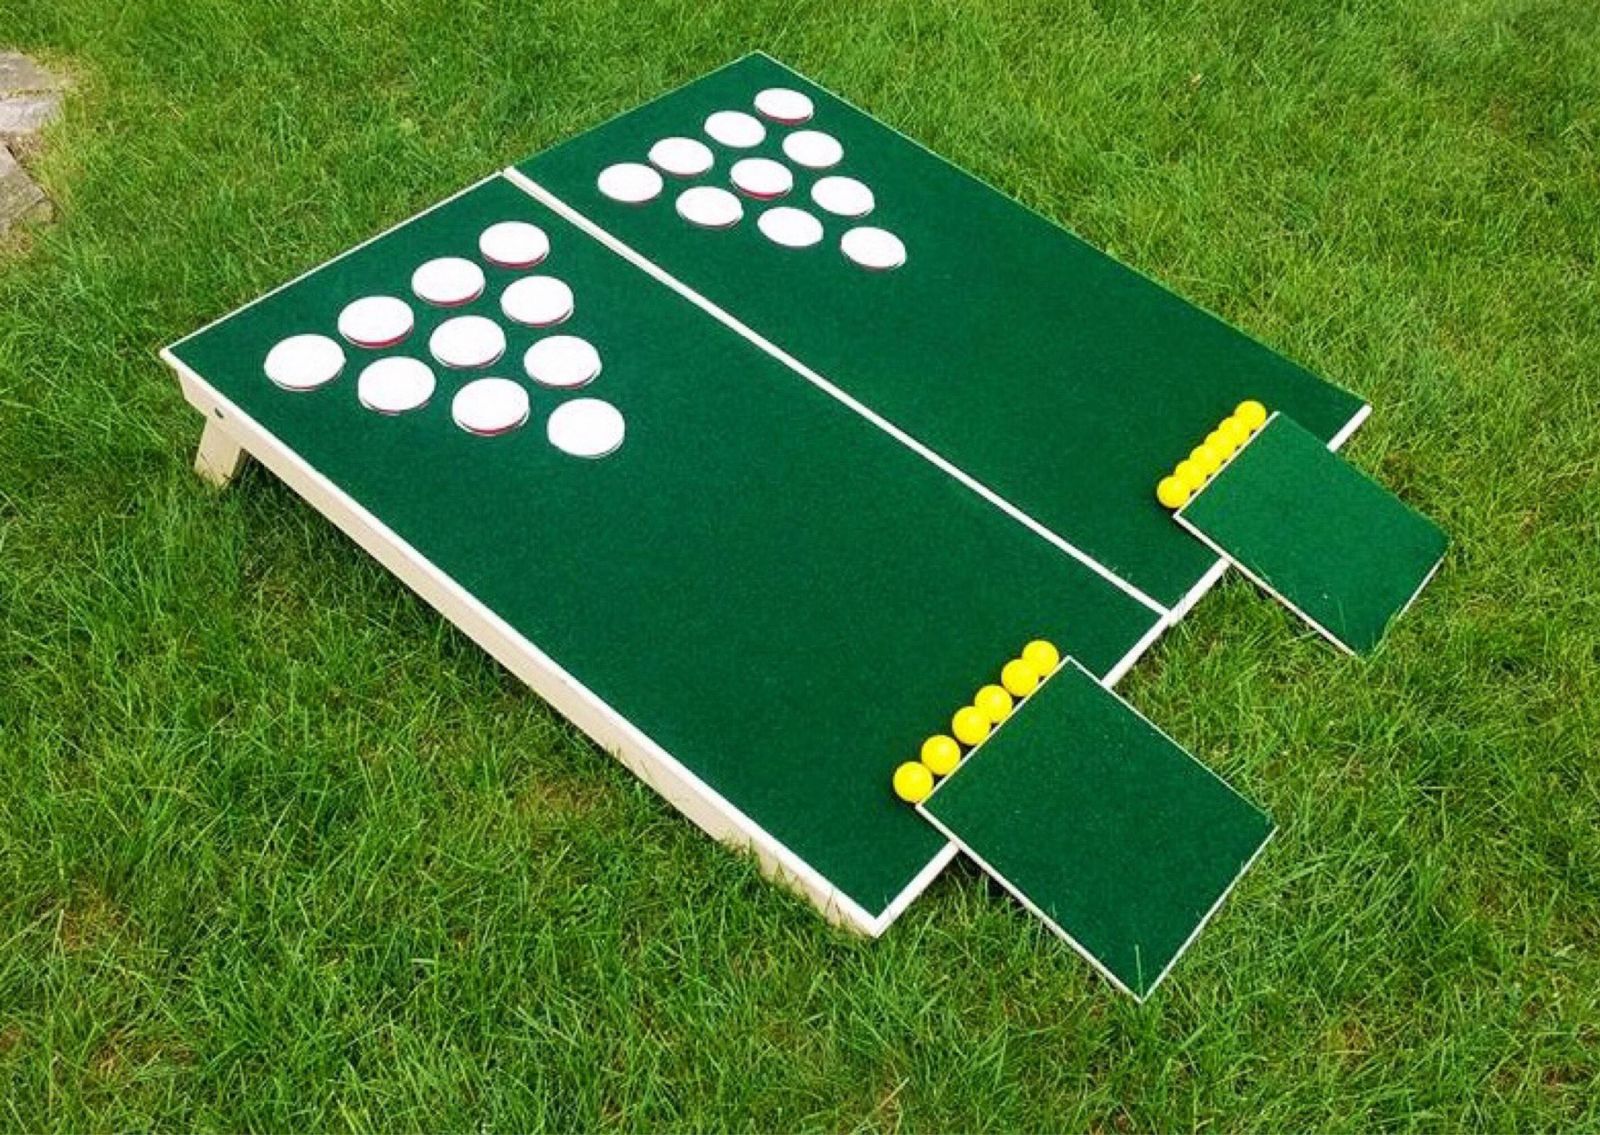 Beer Pong Golf - rent these playing boards for your next tailgating event from Carolina Fun Factory